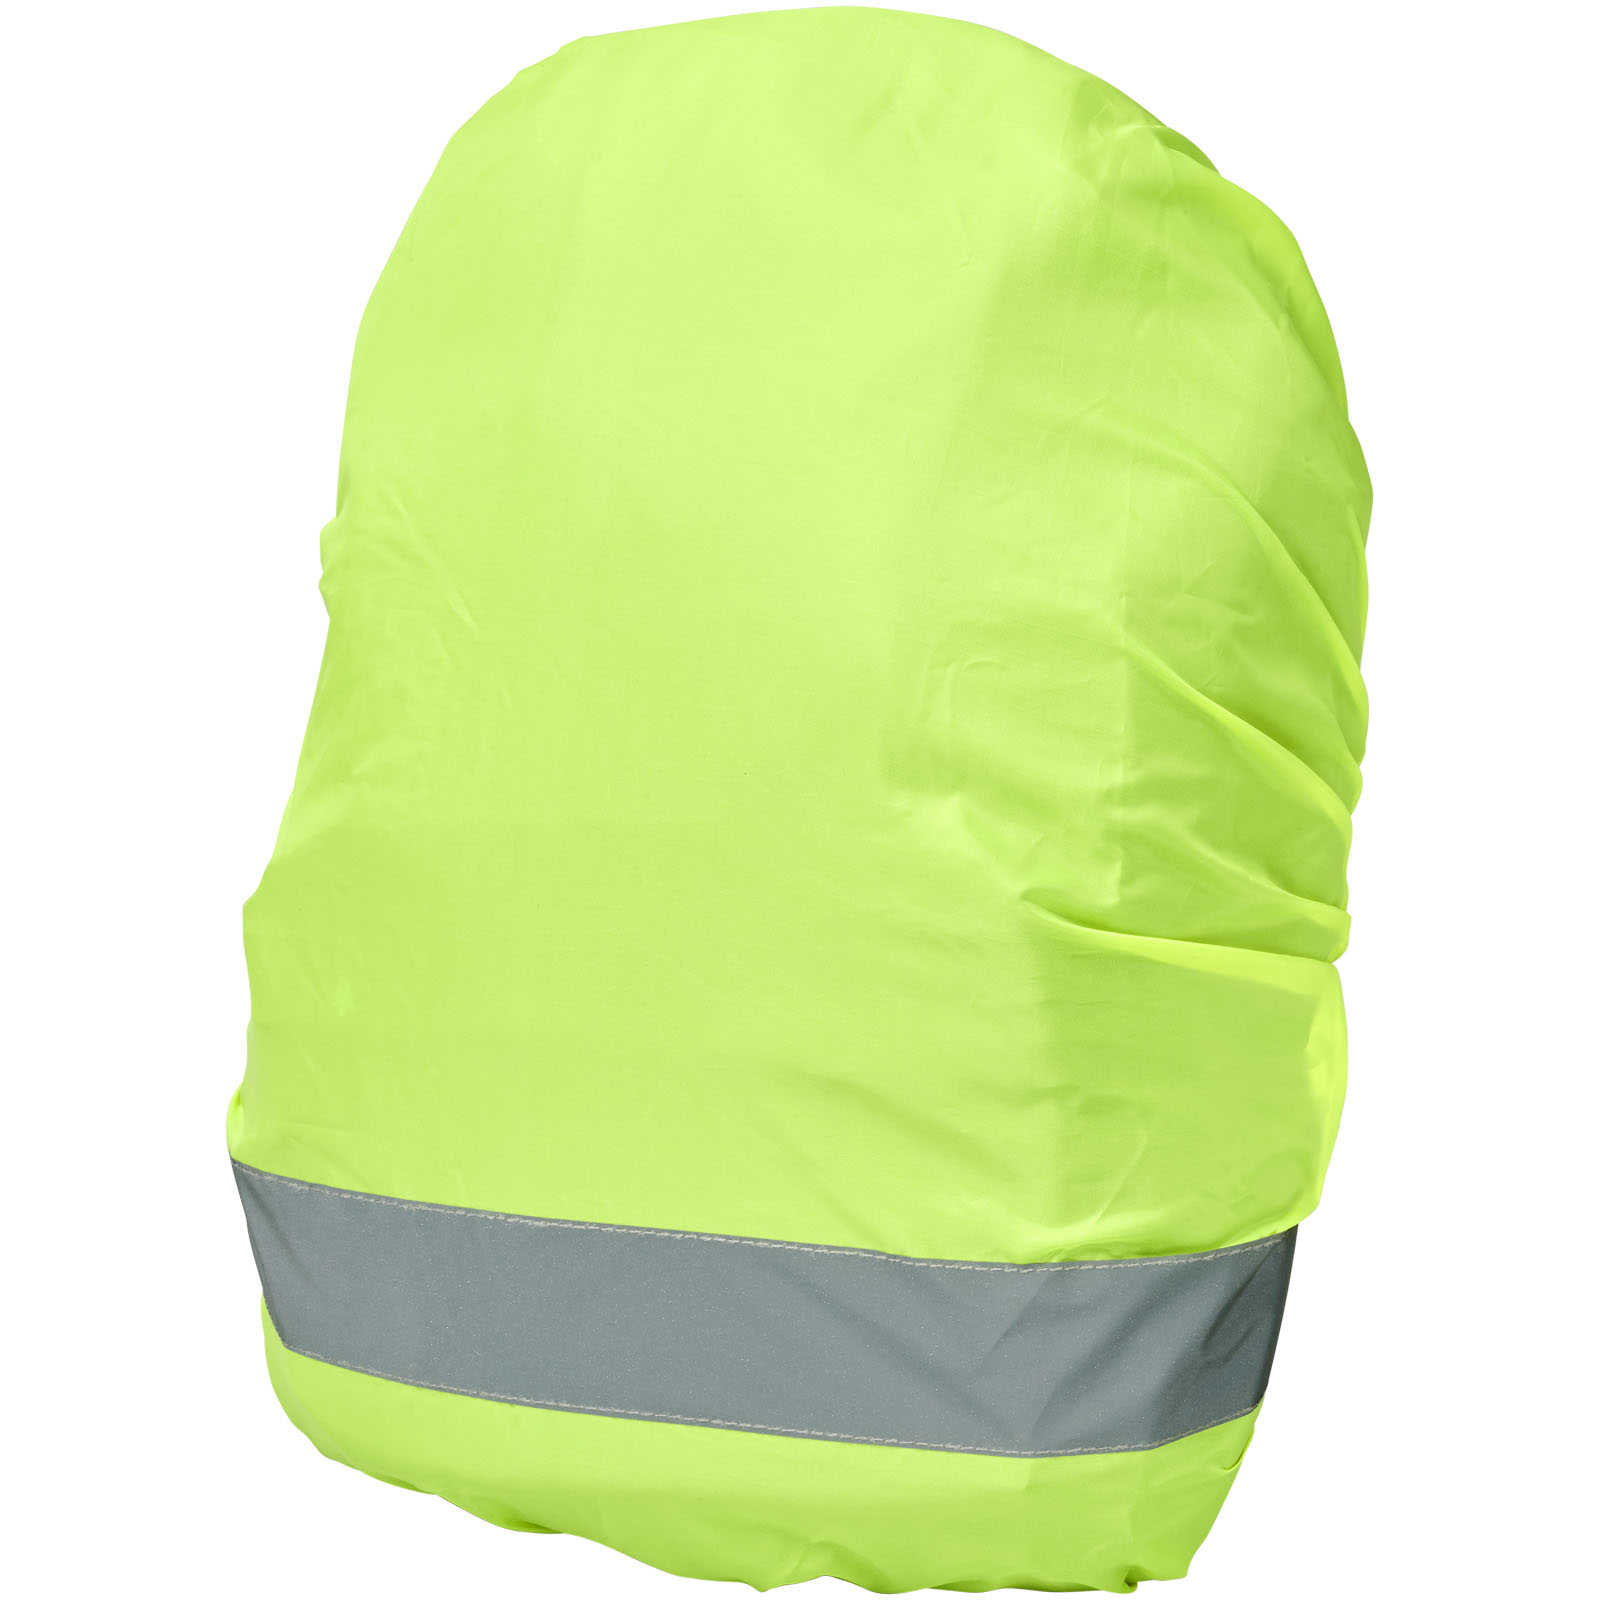 Waterproof reflective backpack cover SURAL - neon yellow